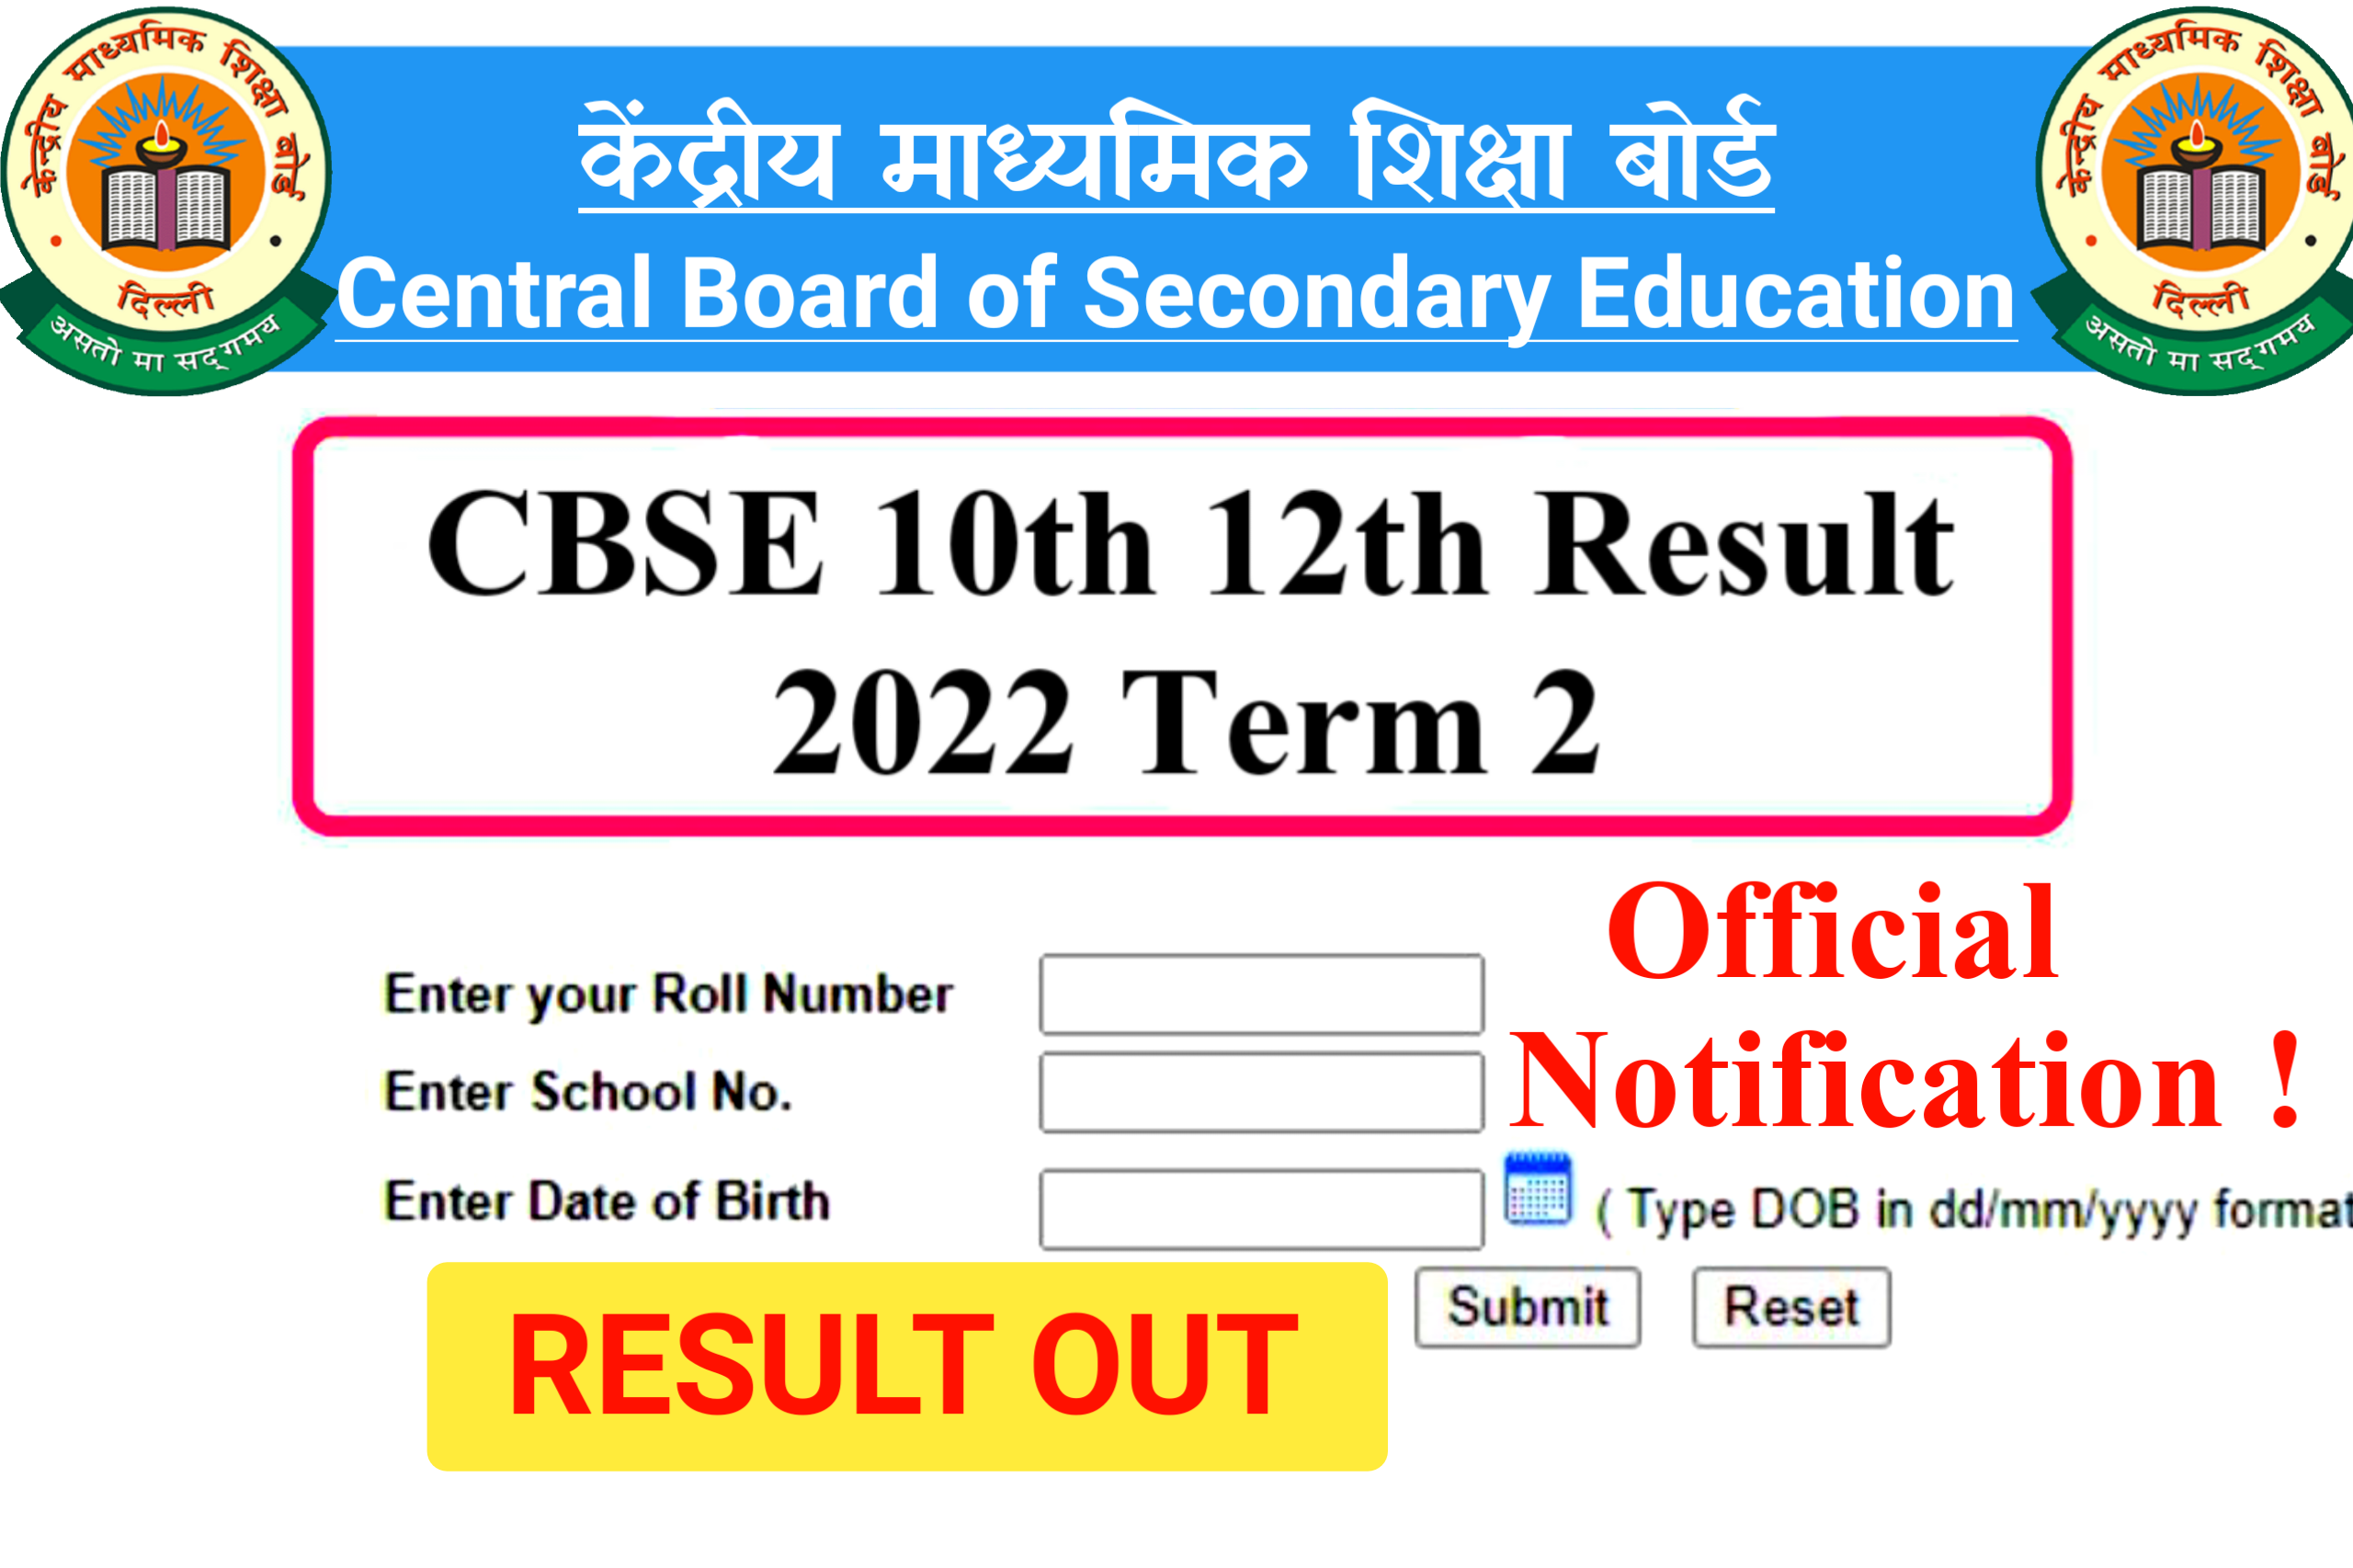 CBSE Board Result 2022 Out Today